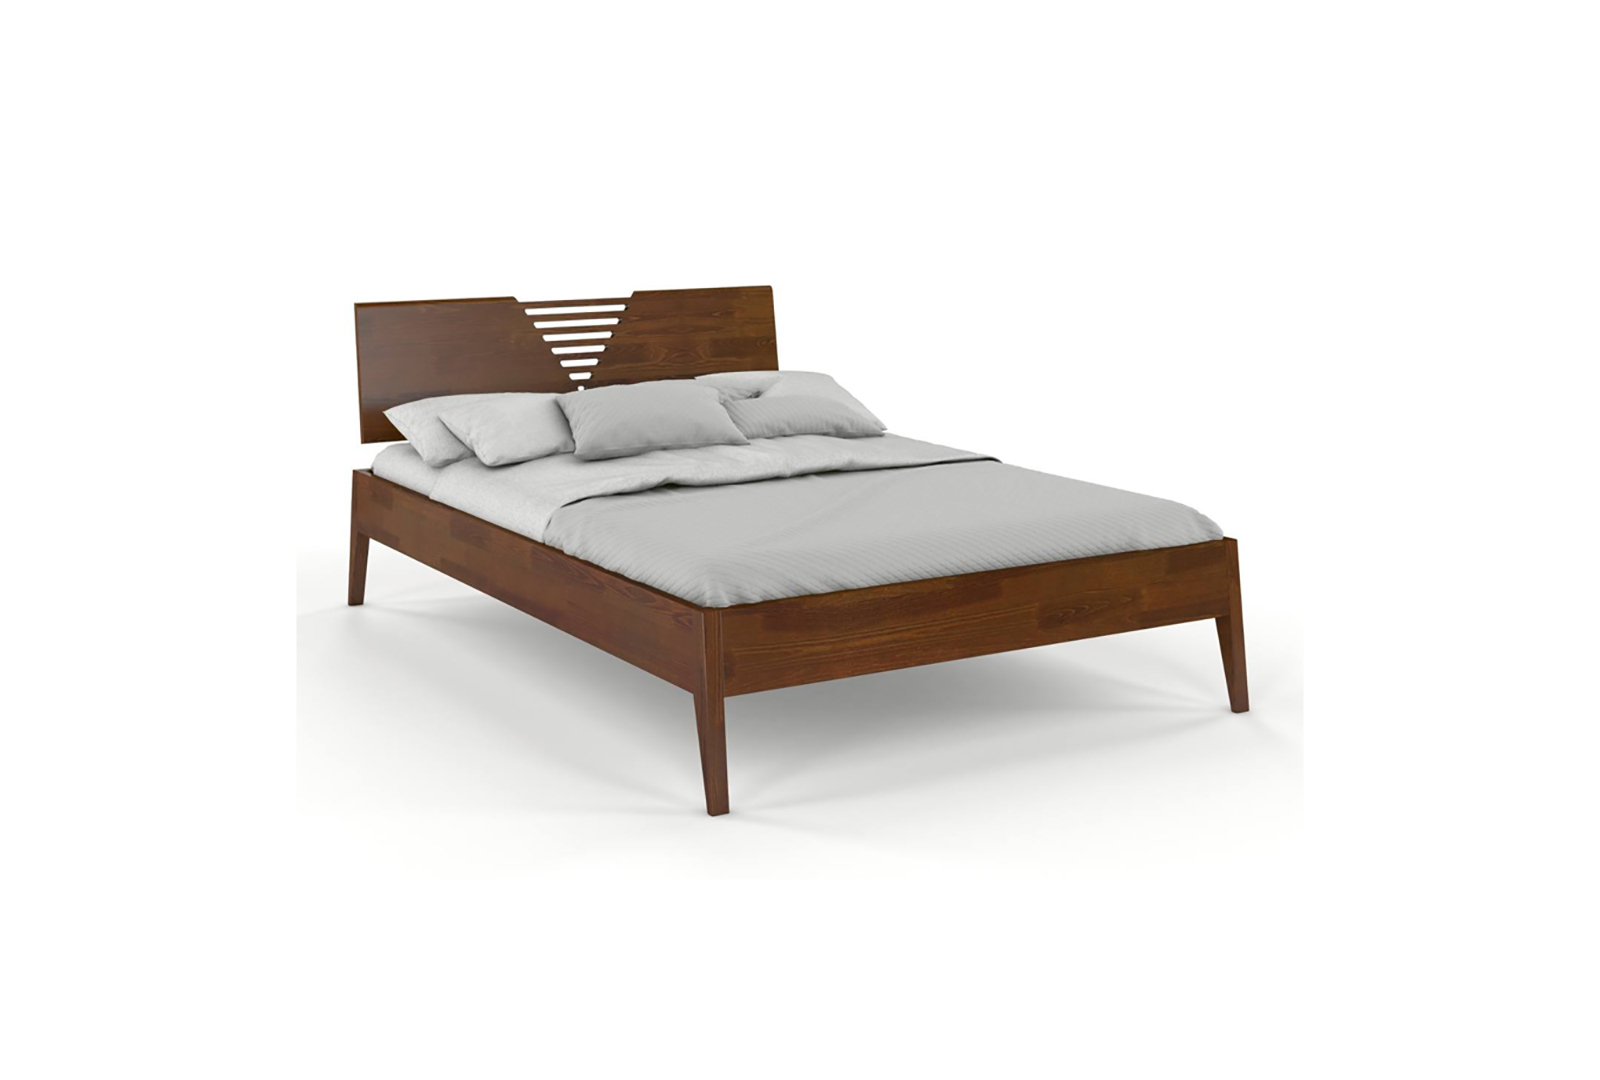 VISBY WOLOMIN WOODEN PINE BED 1